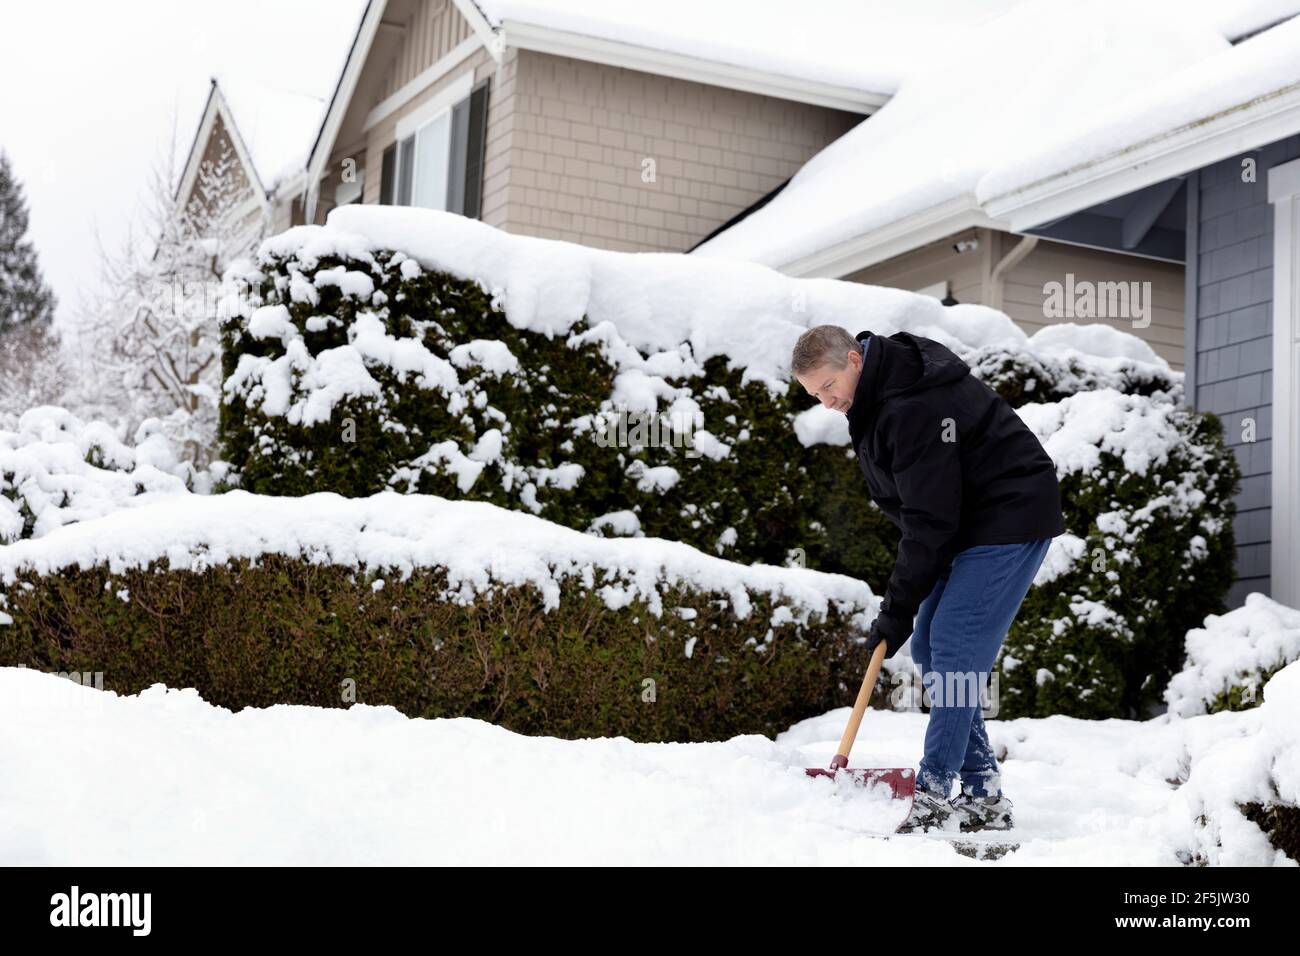 Mature man shoveling snow off sidewalk in front of home Stock Photo